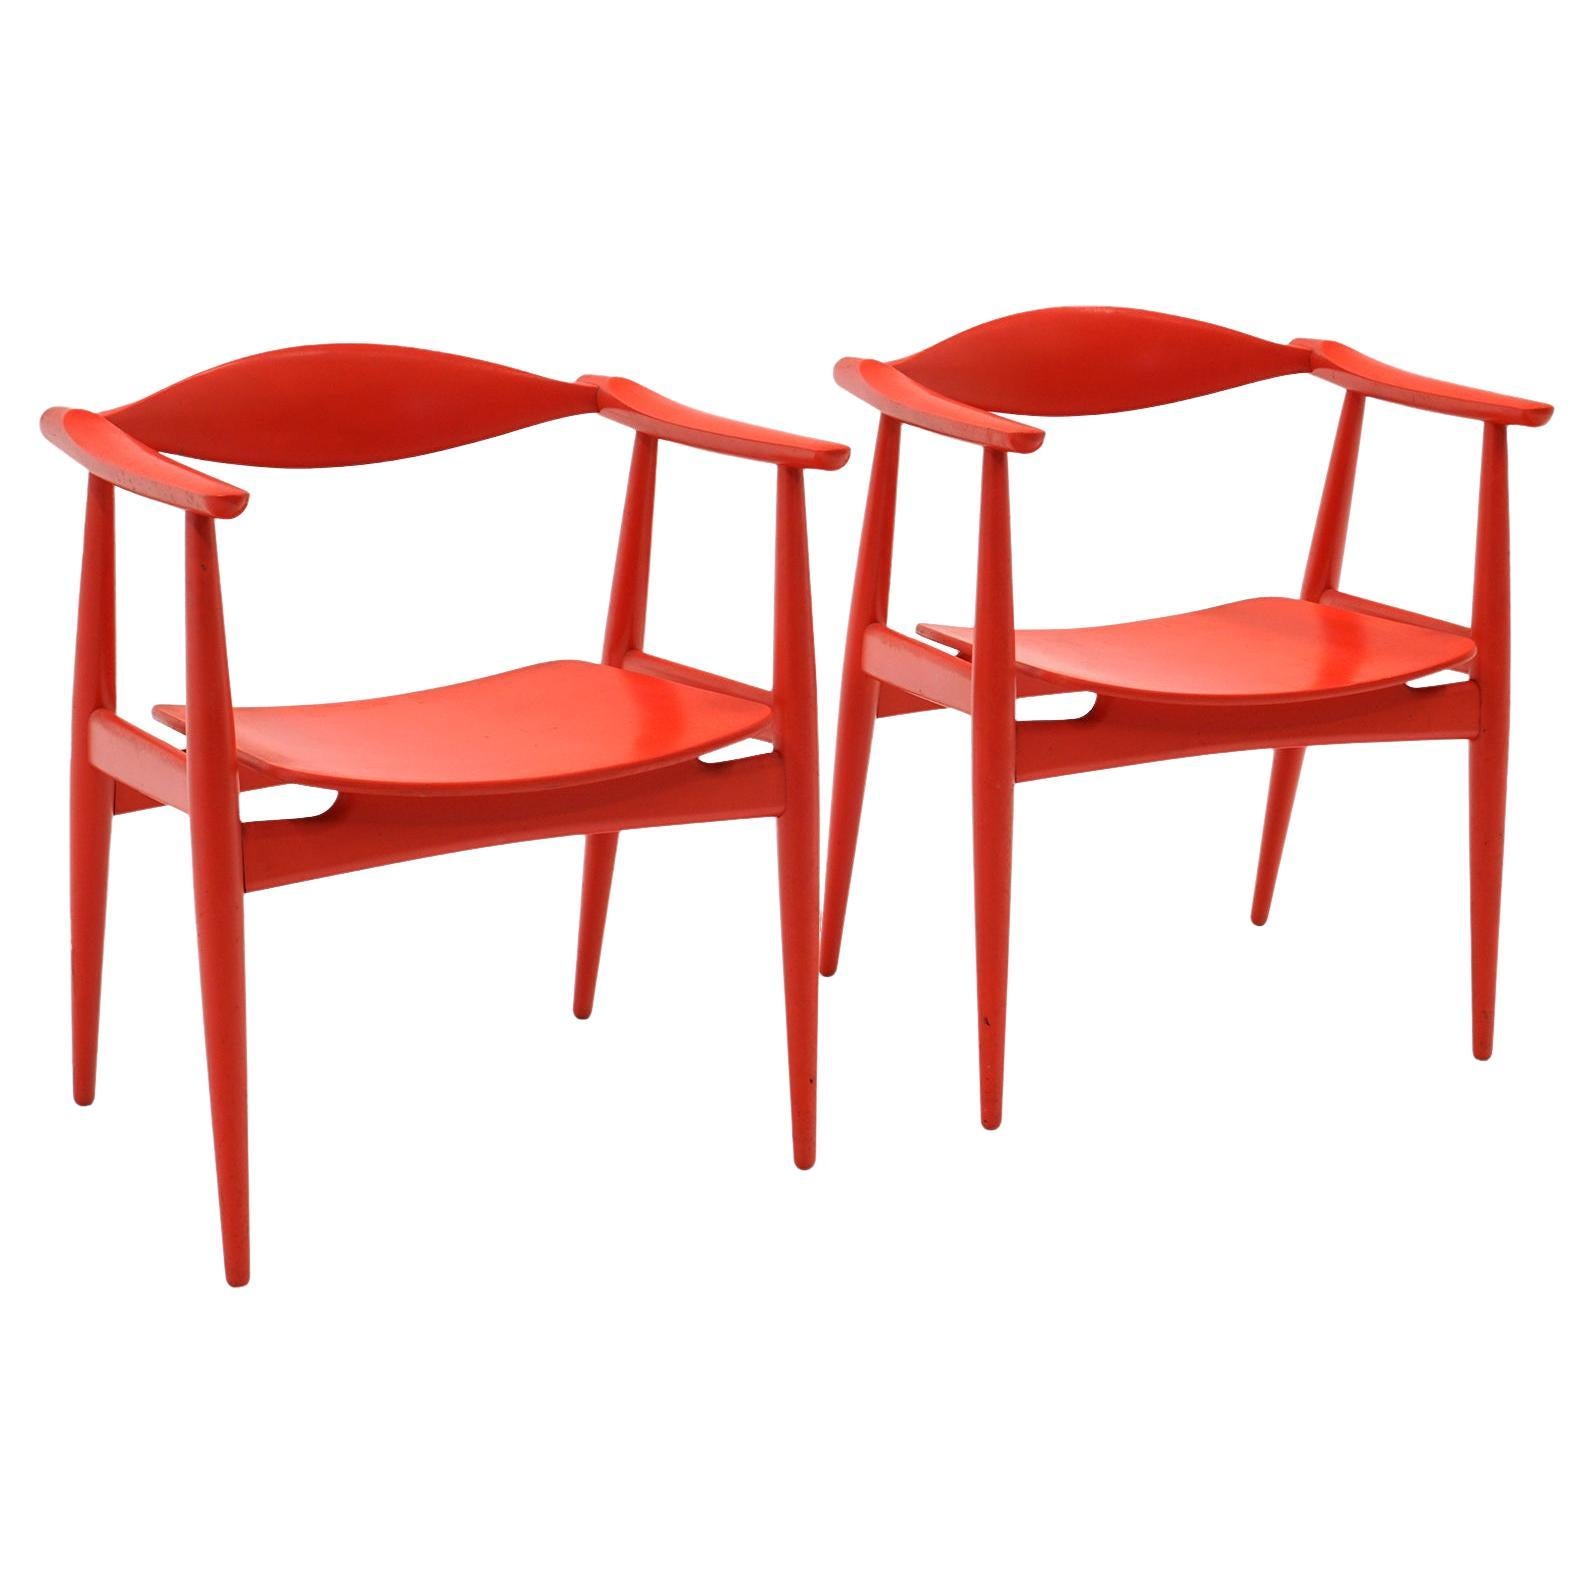 Rare Pair of Red Hans Wegner Arm Chairs for Hansen and Son. Original. Signed.